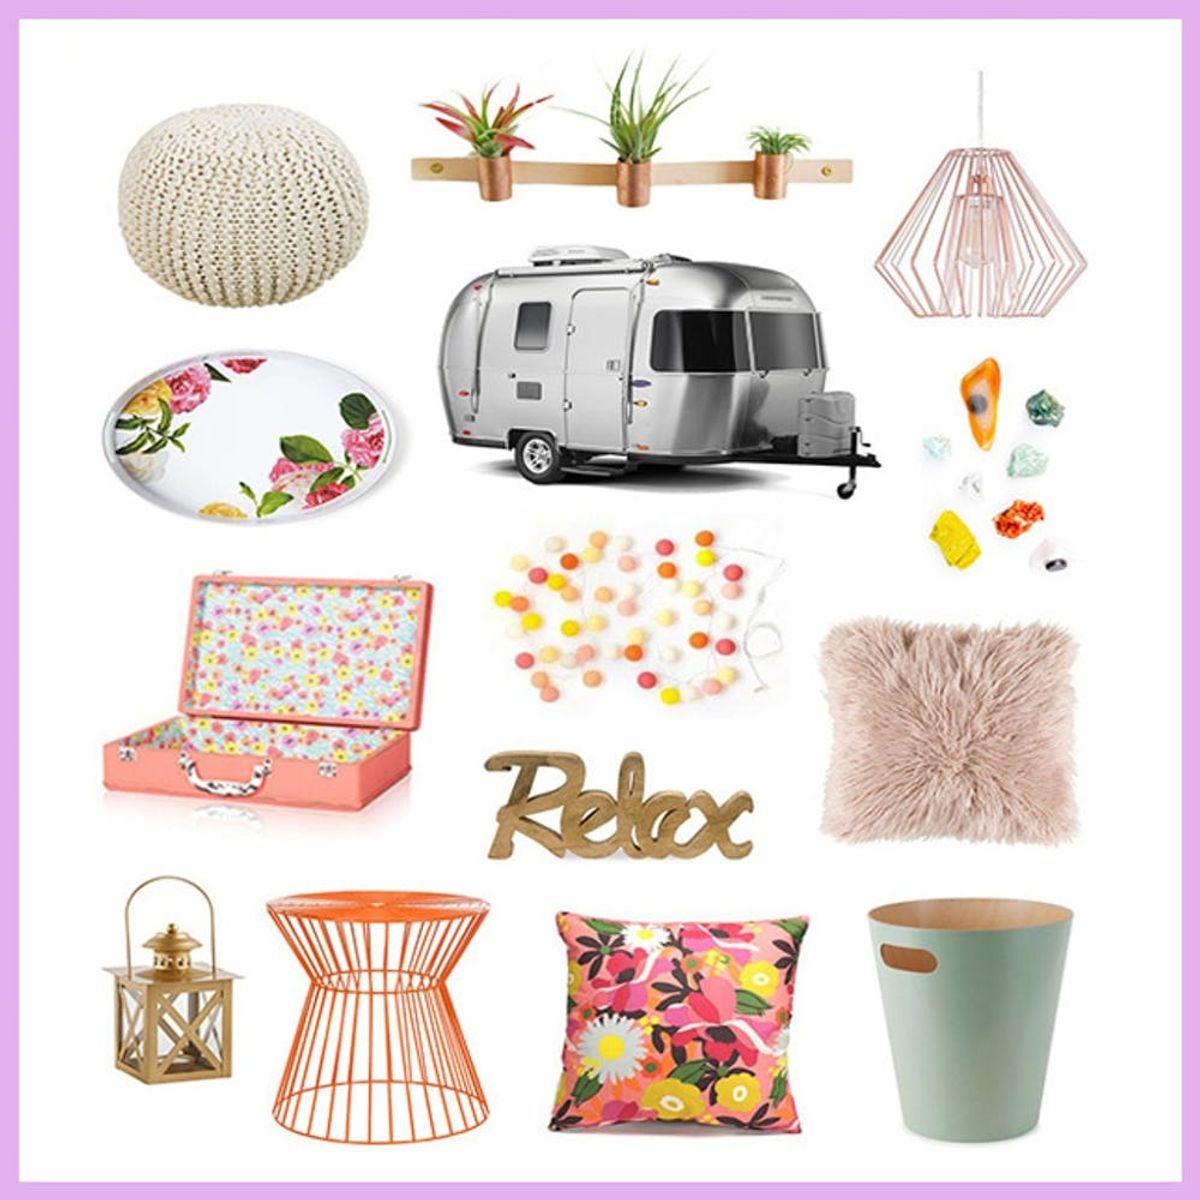 3 Glam Ways to Decorate Your Airstream Camper